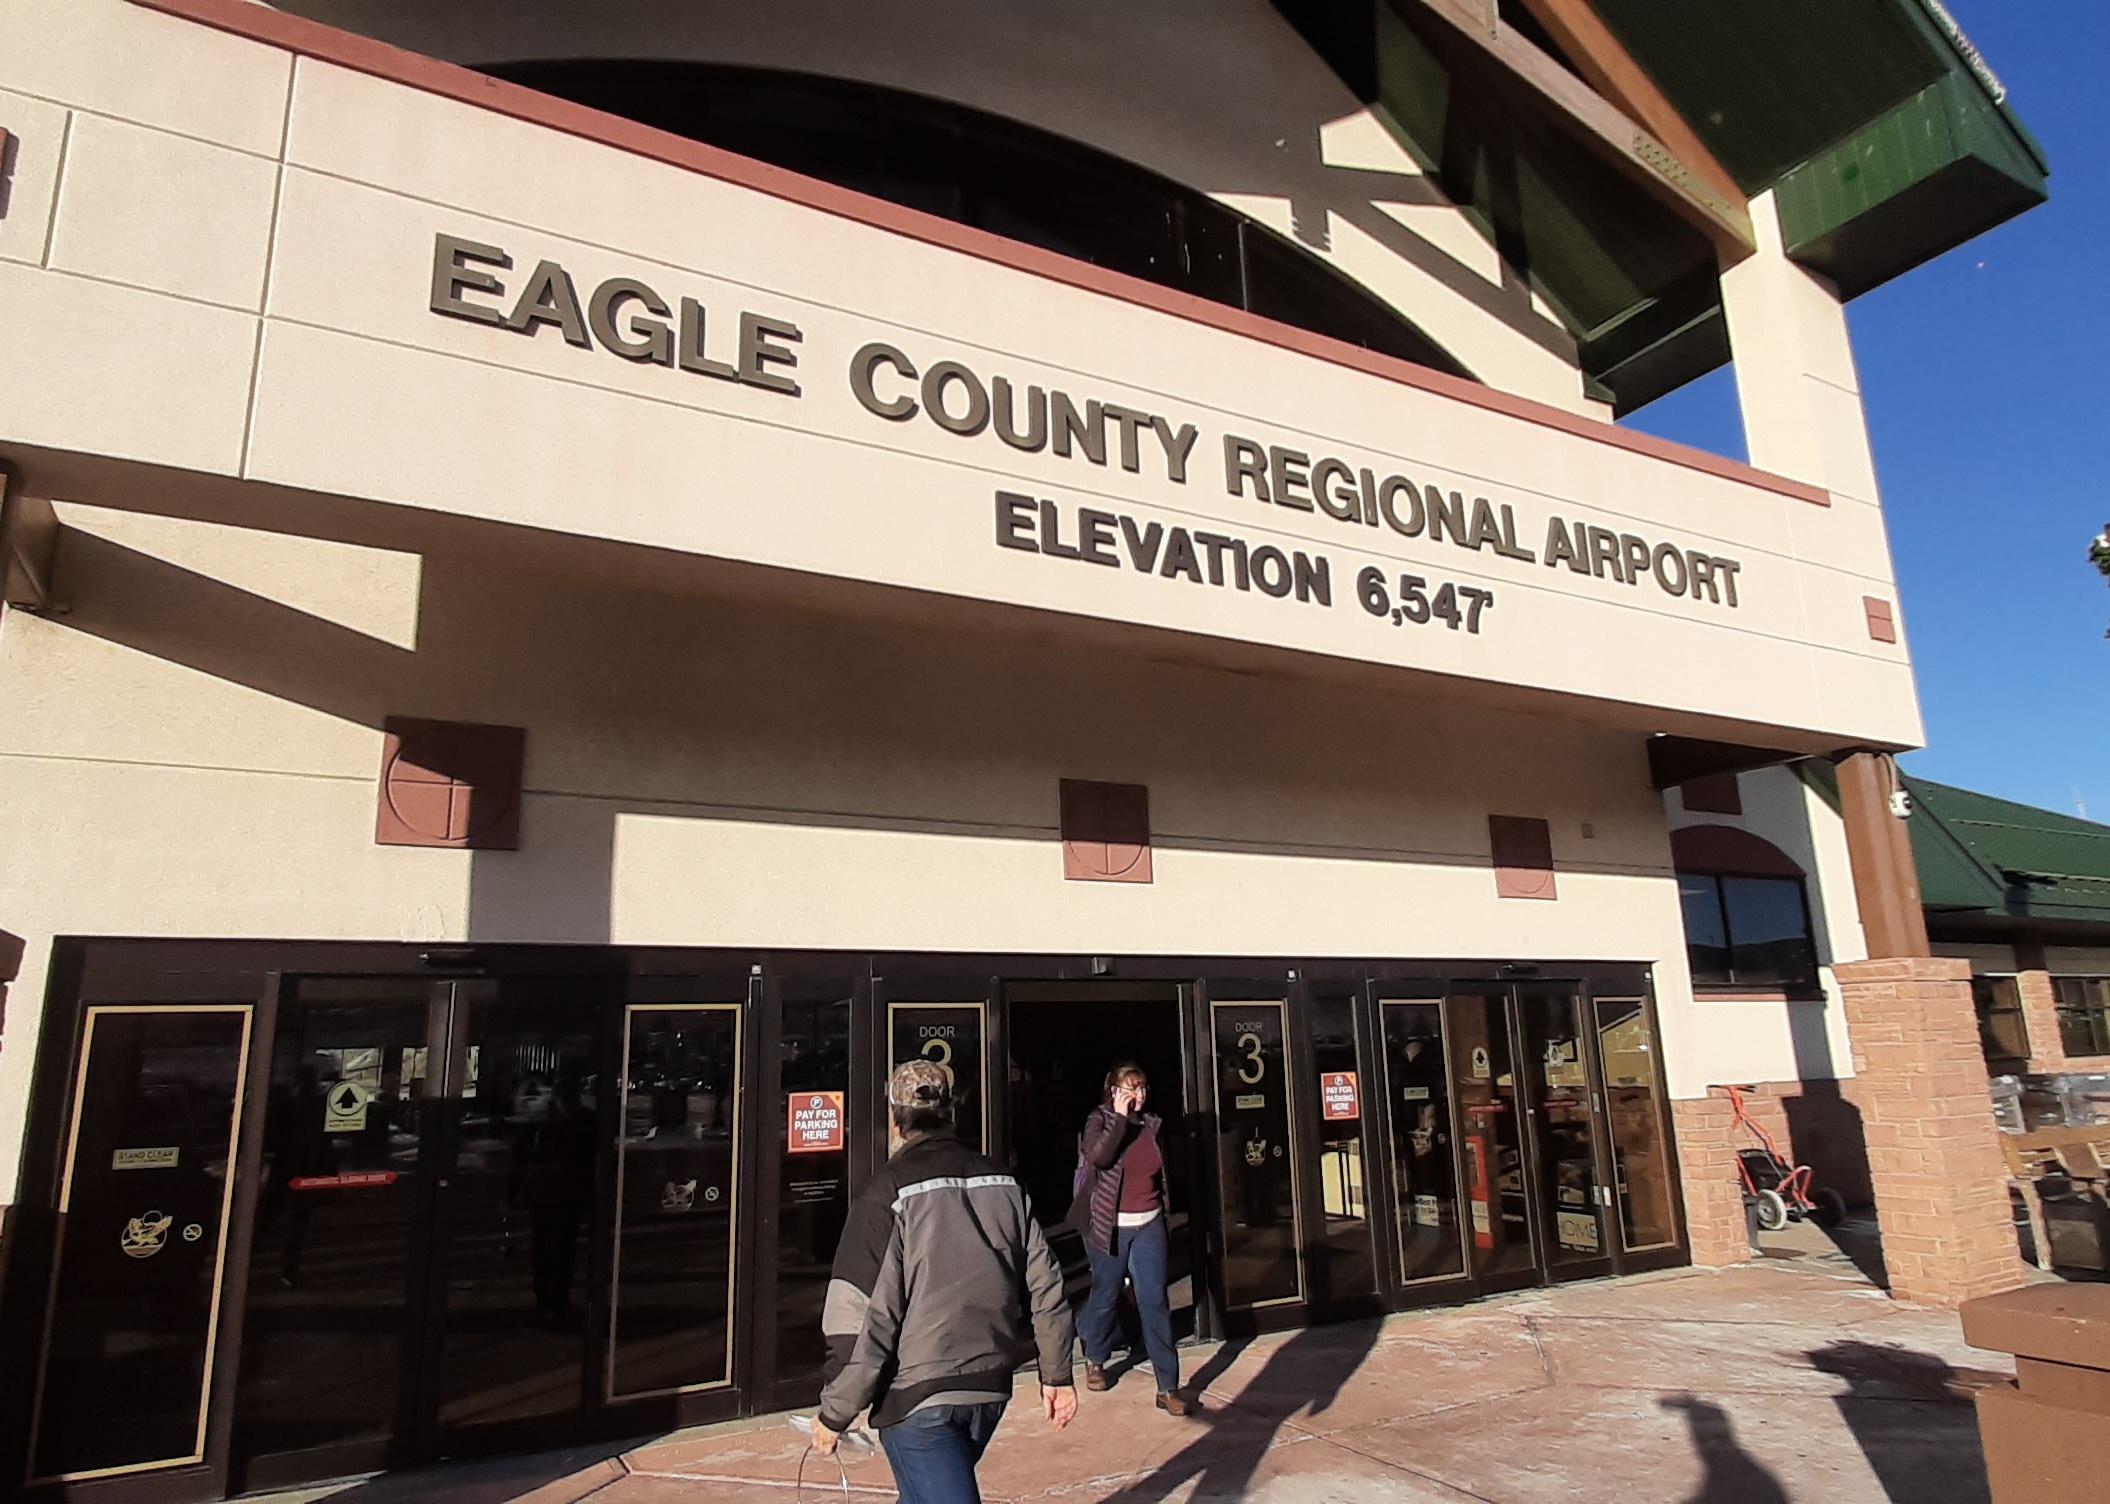 The entrance to the Eagle County Regional airport building.